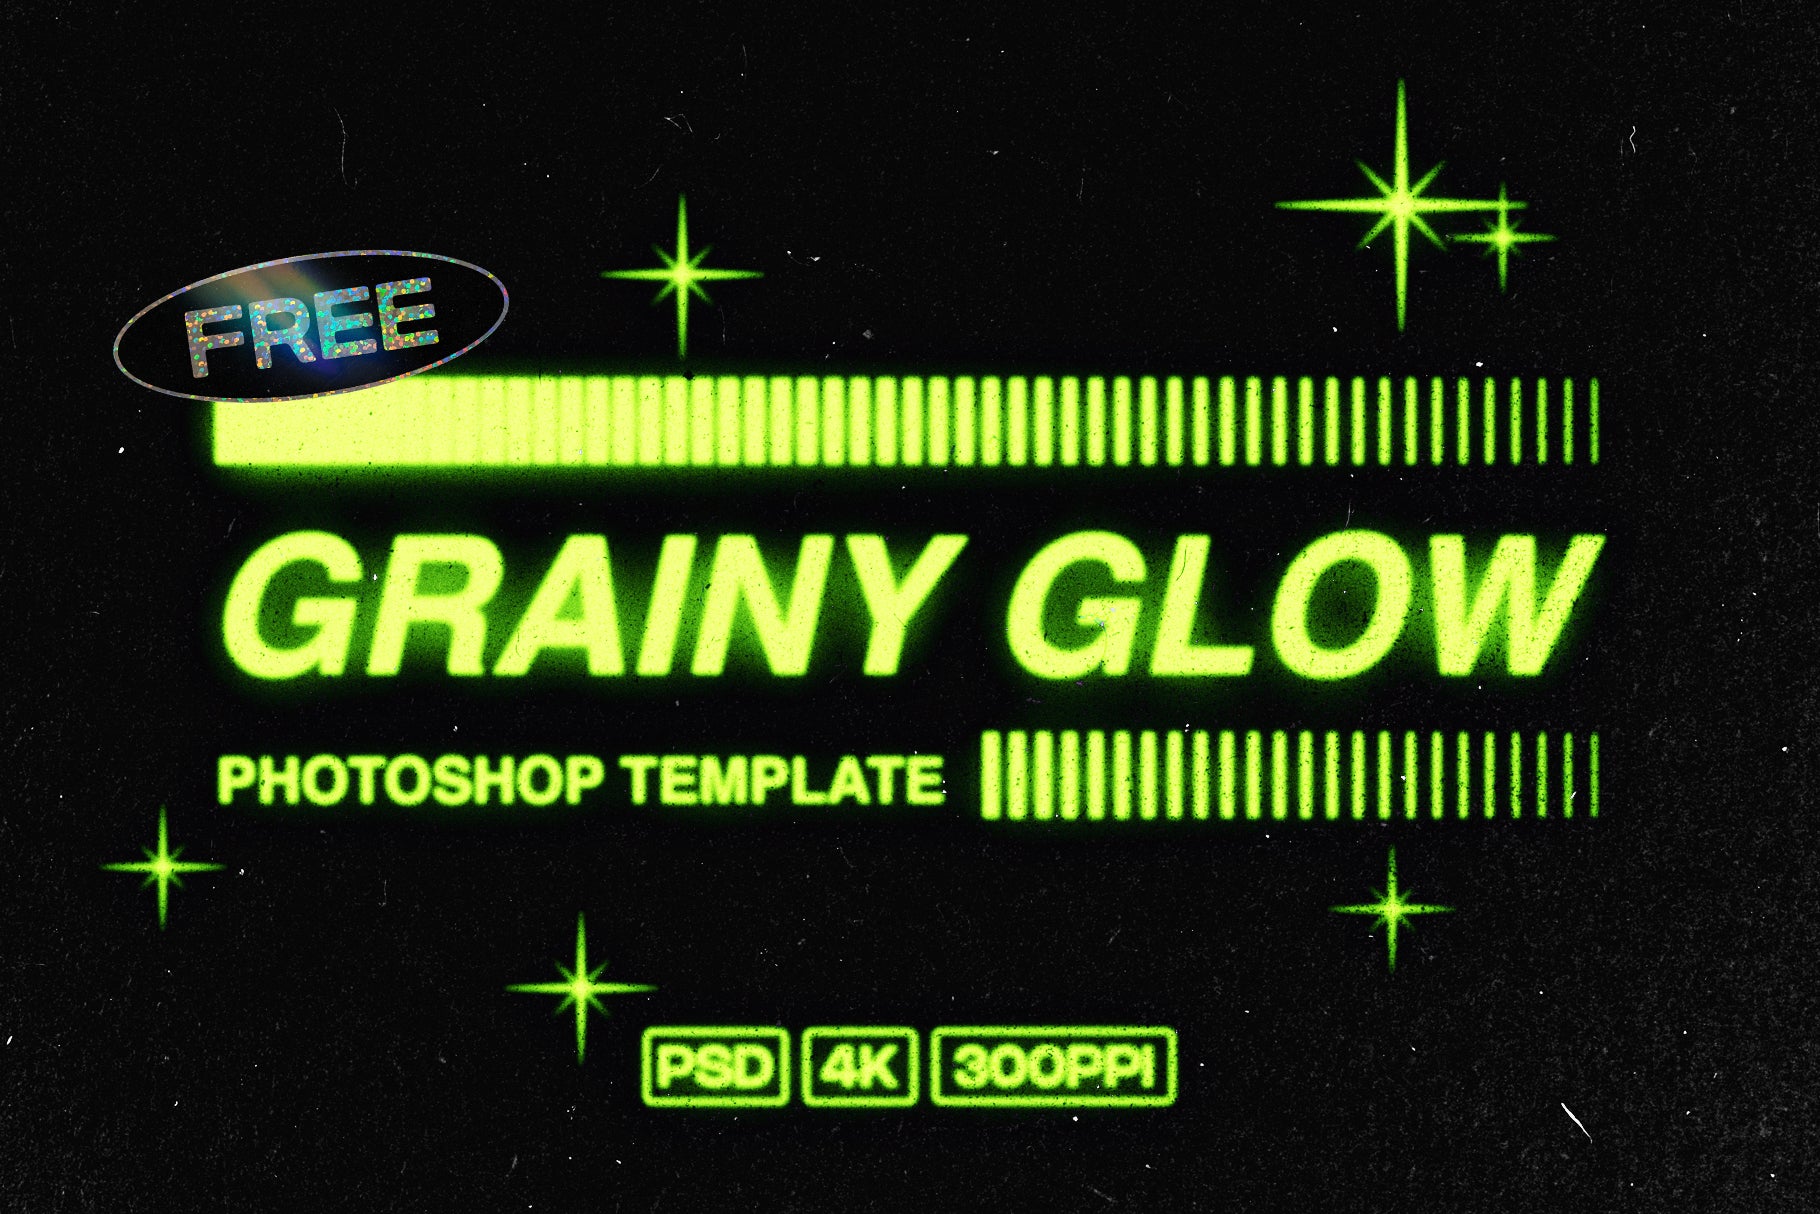 Grainy Glow Template Free Psd File Download